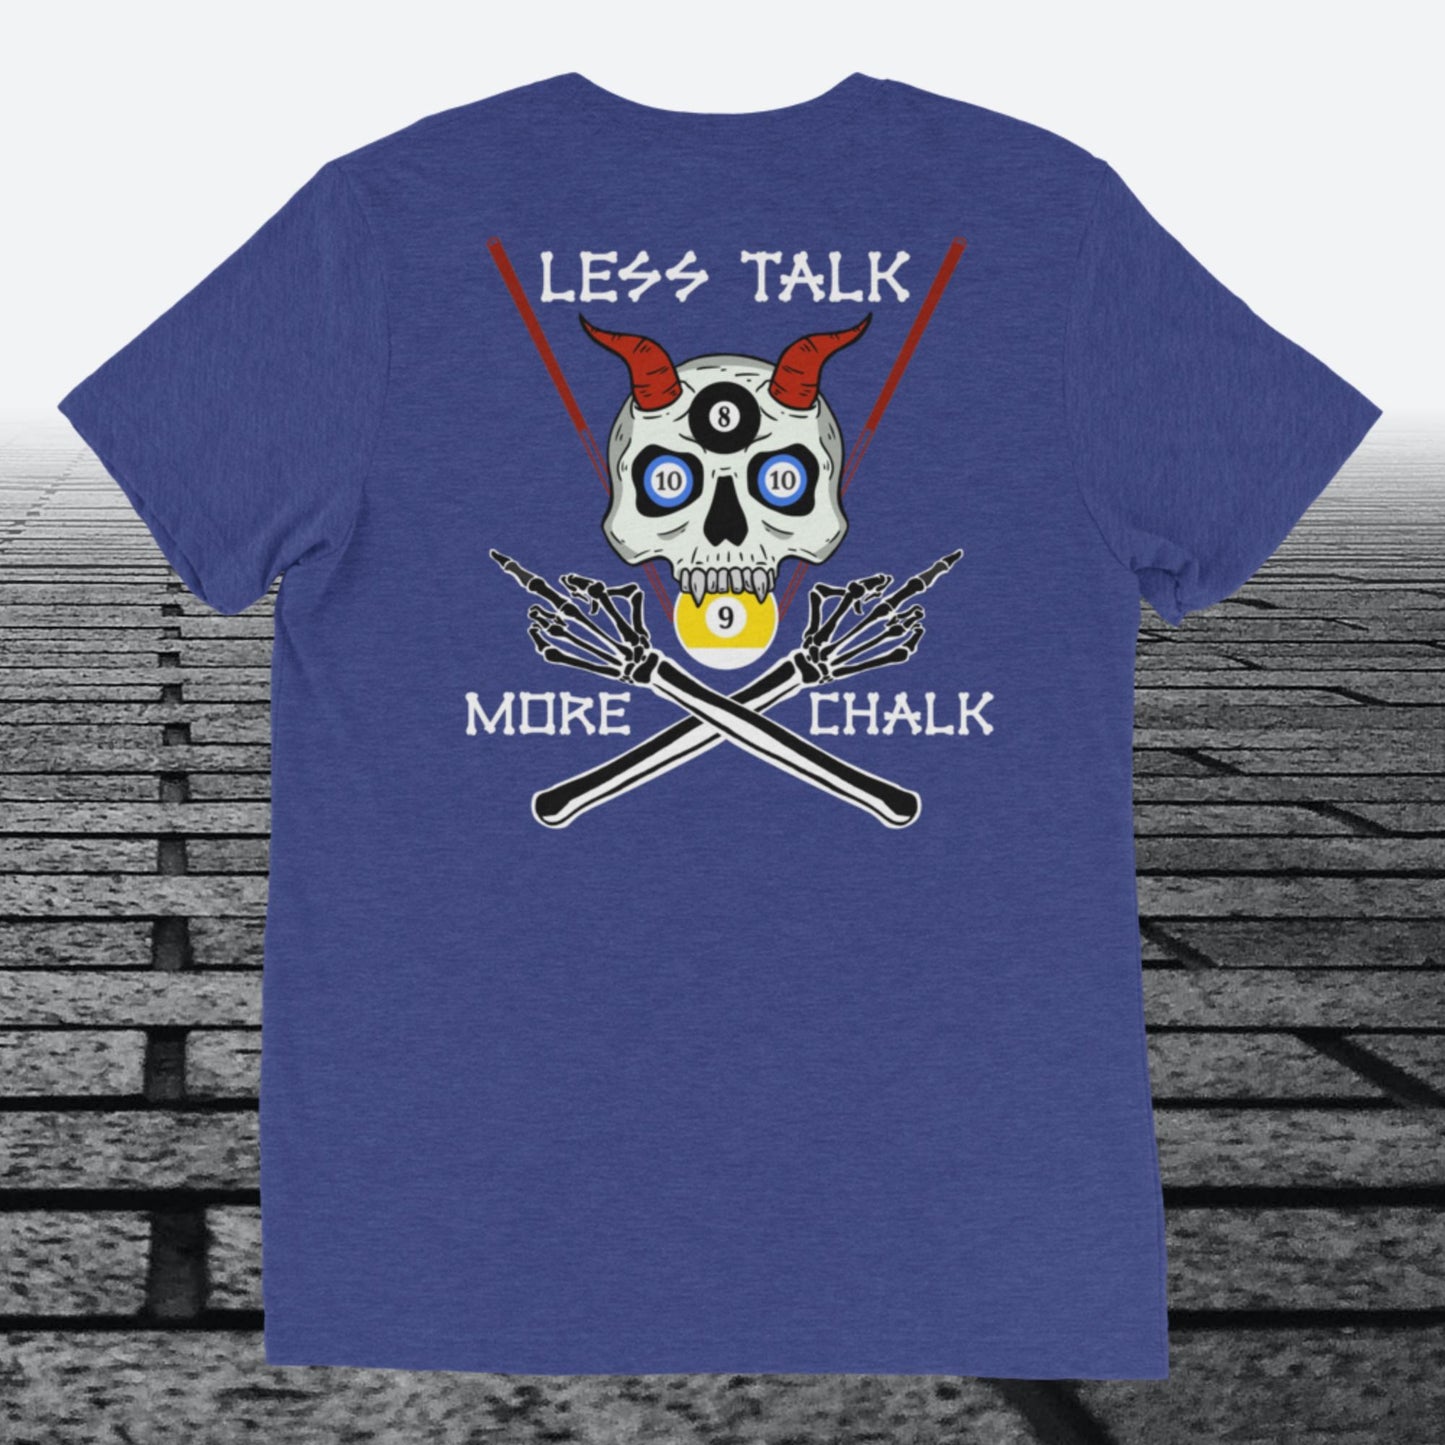 Less Talk More Chalk, with logo on the front, Tri-blend t-shirt